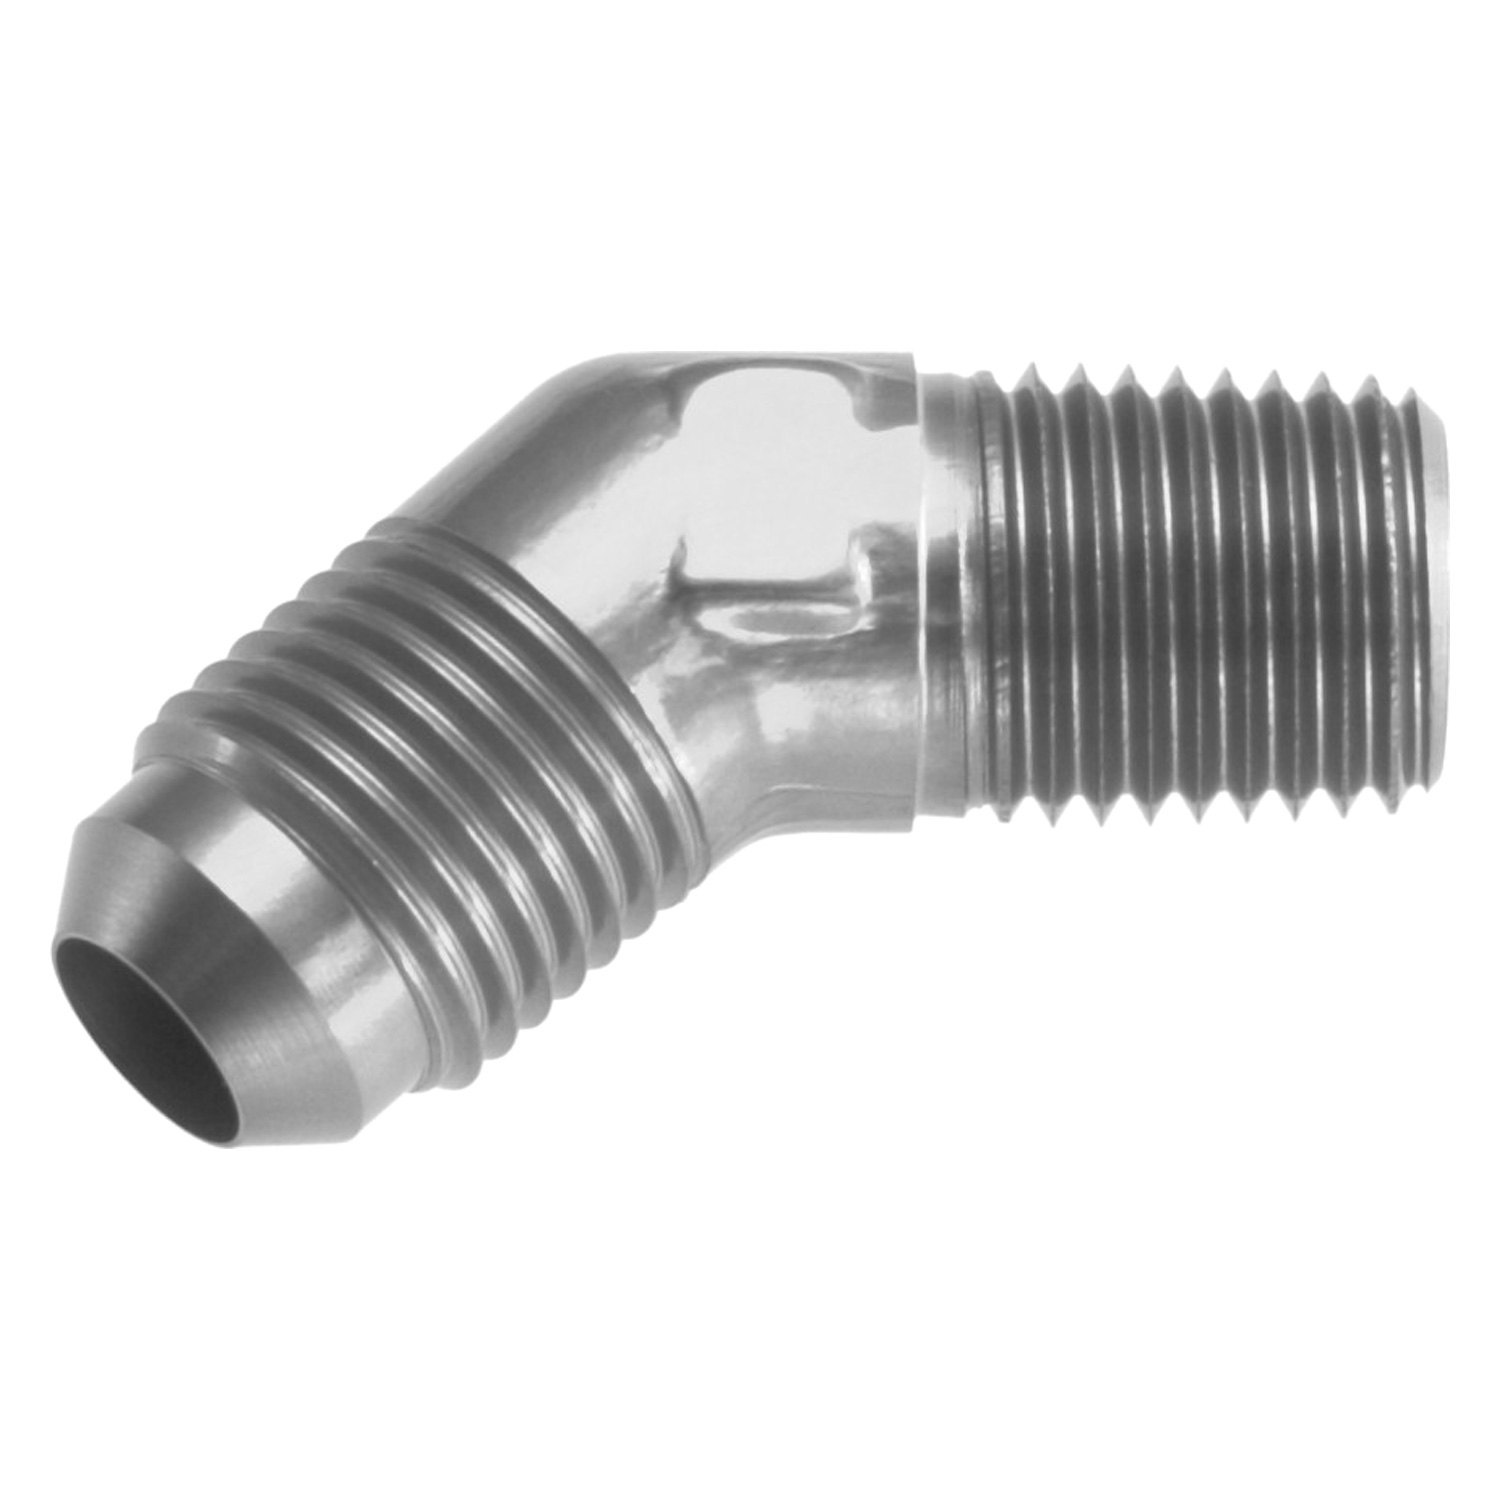 Redhorse Performance 823-12-16-2 Adapter 